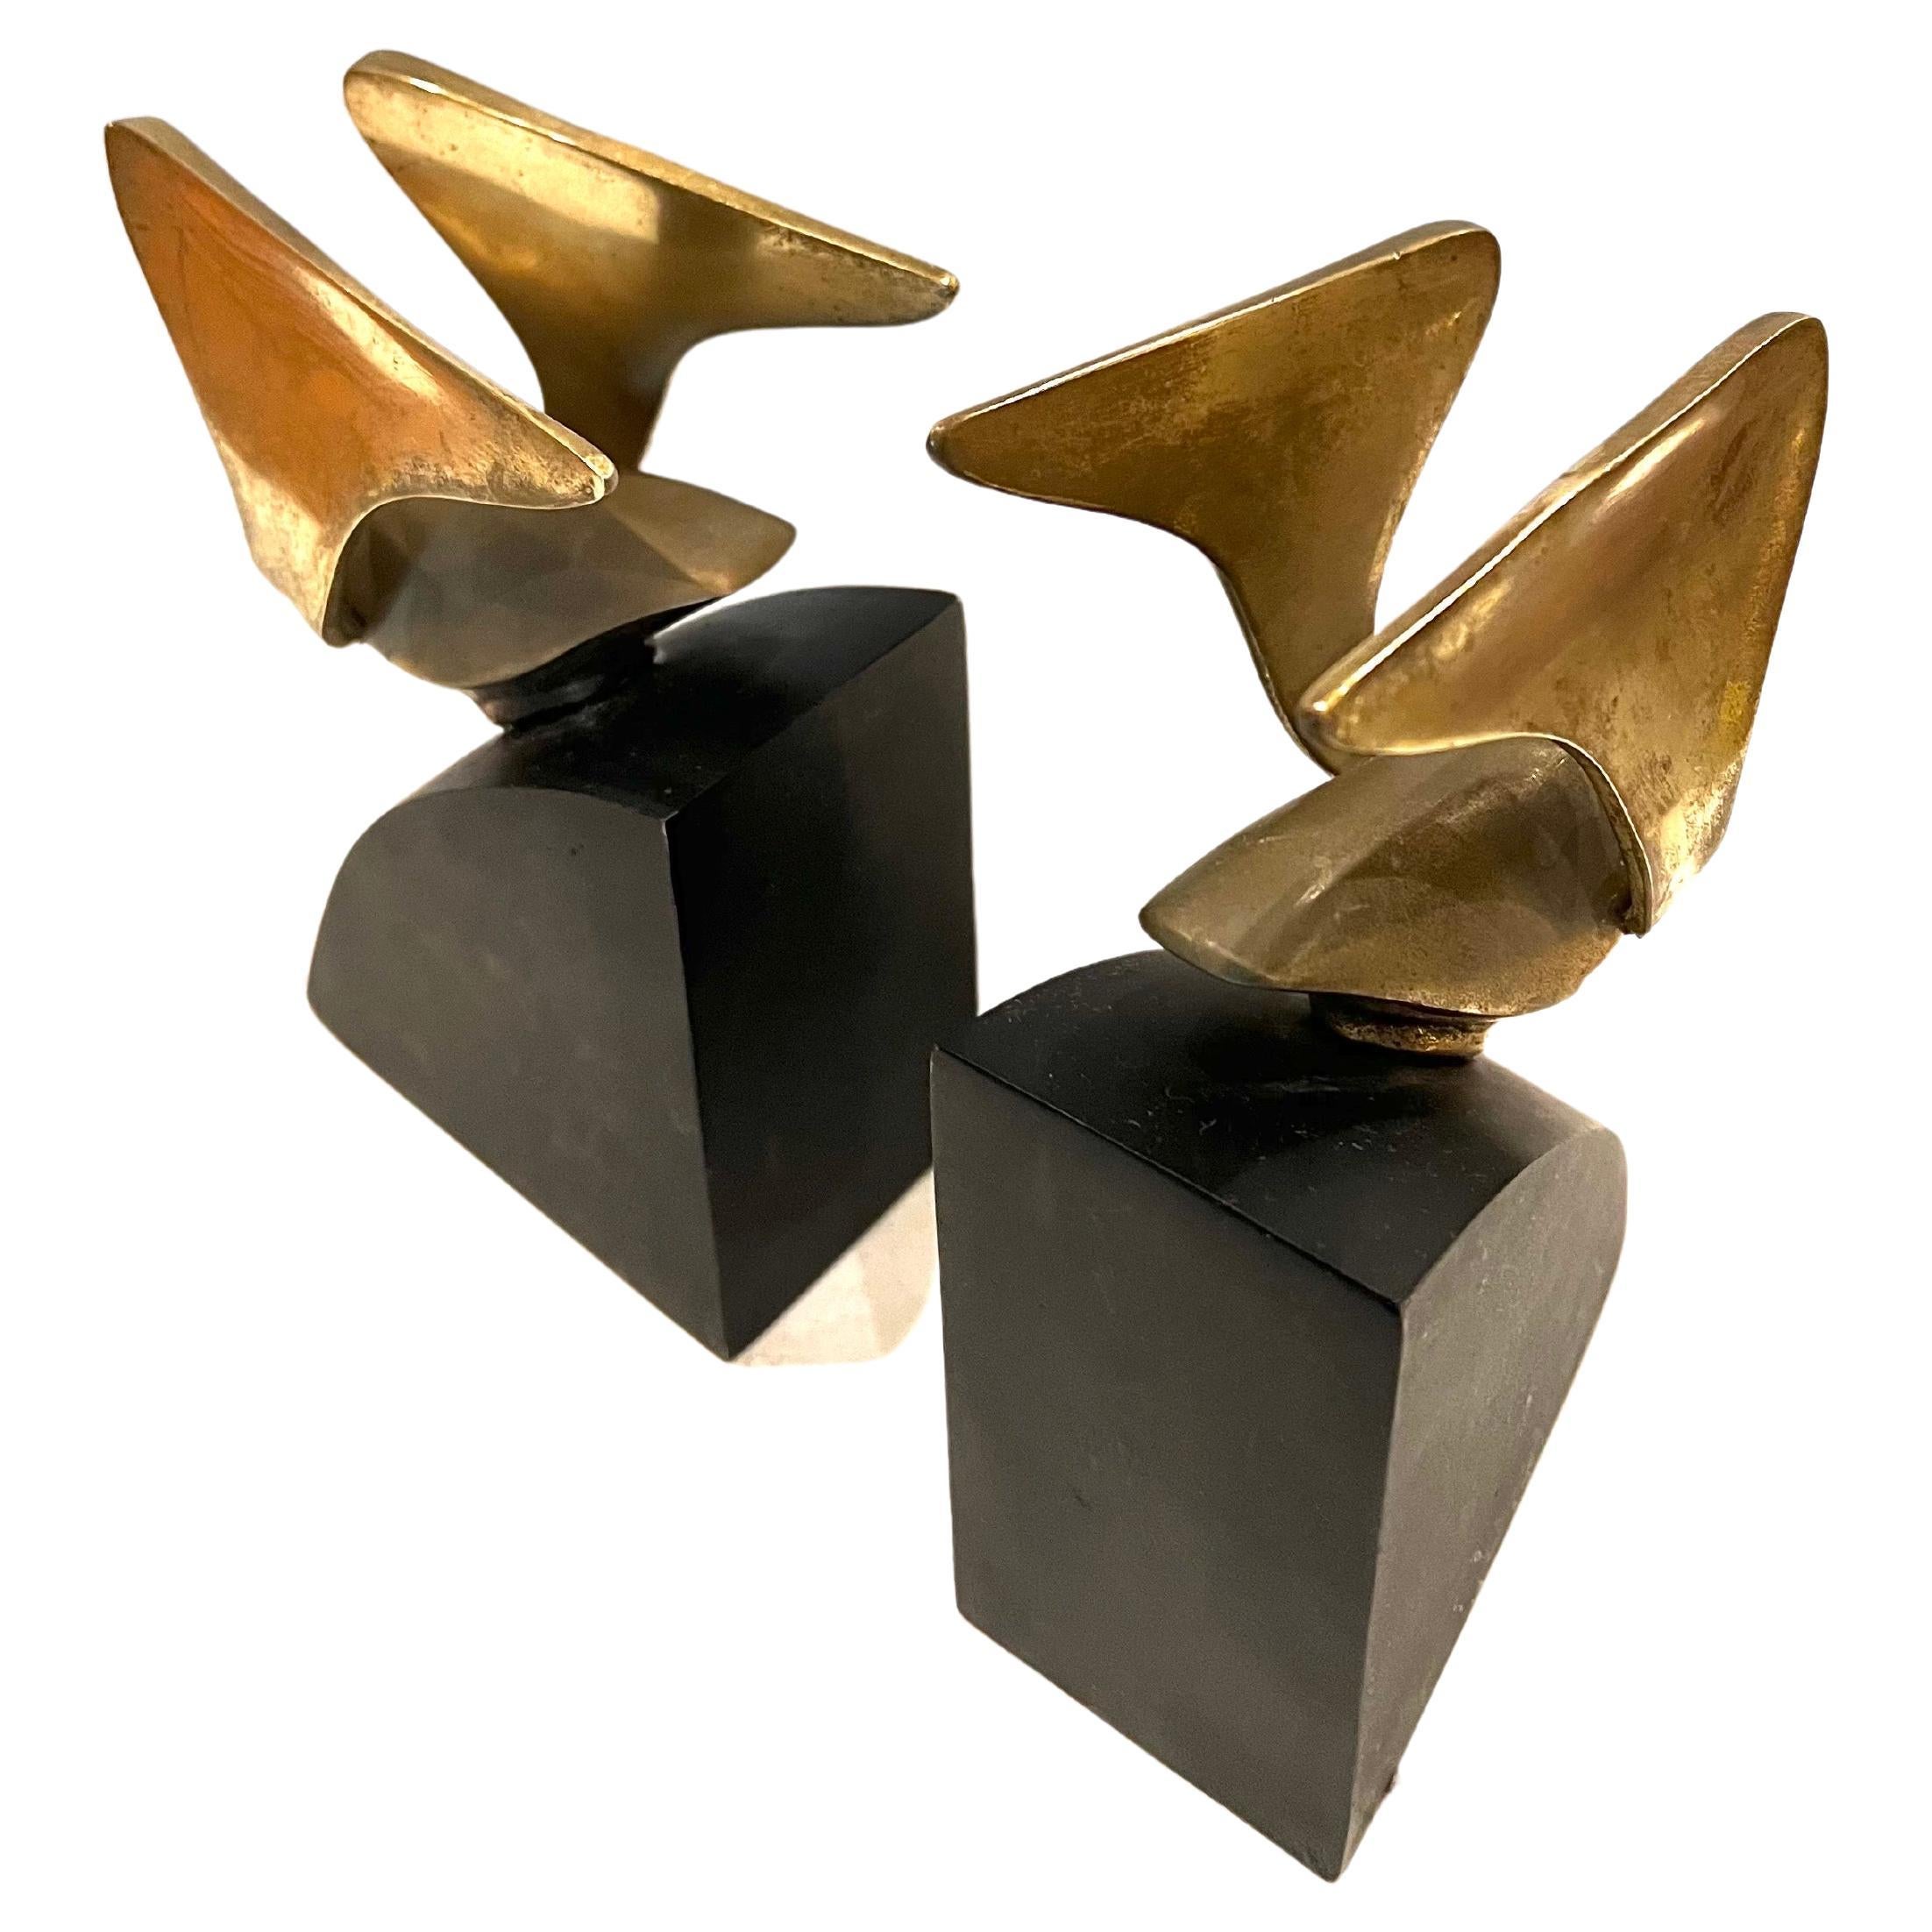 Nice pair of patinated brass flying birds bookends sitting on black enameled metal base.